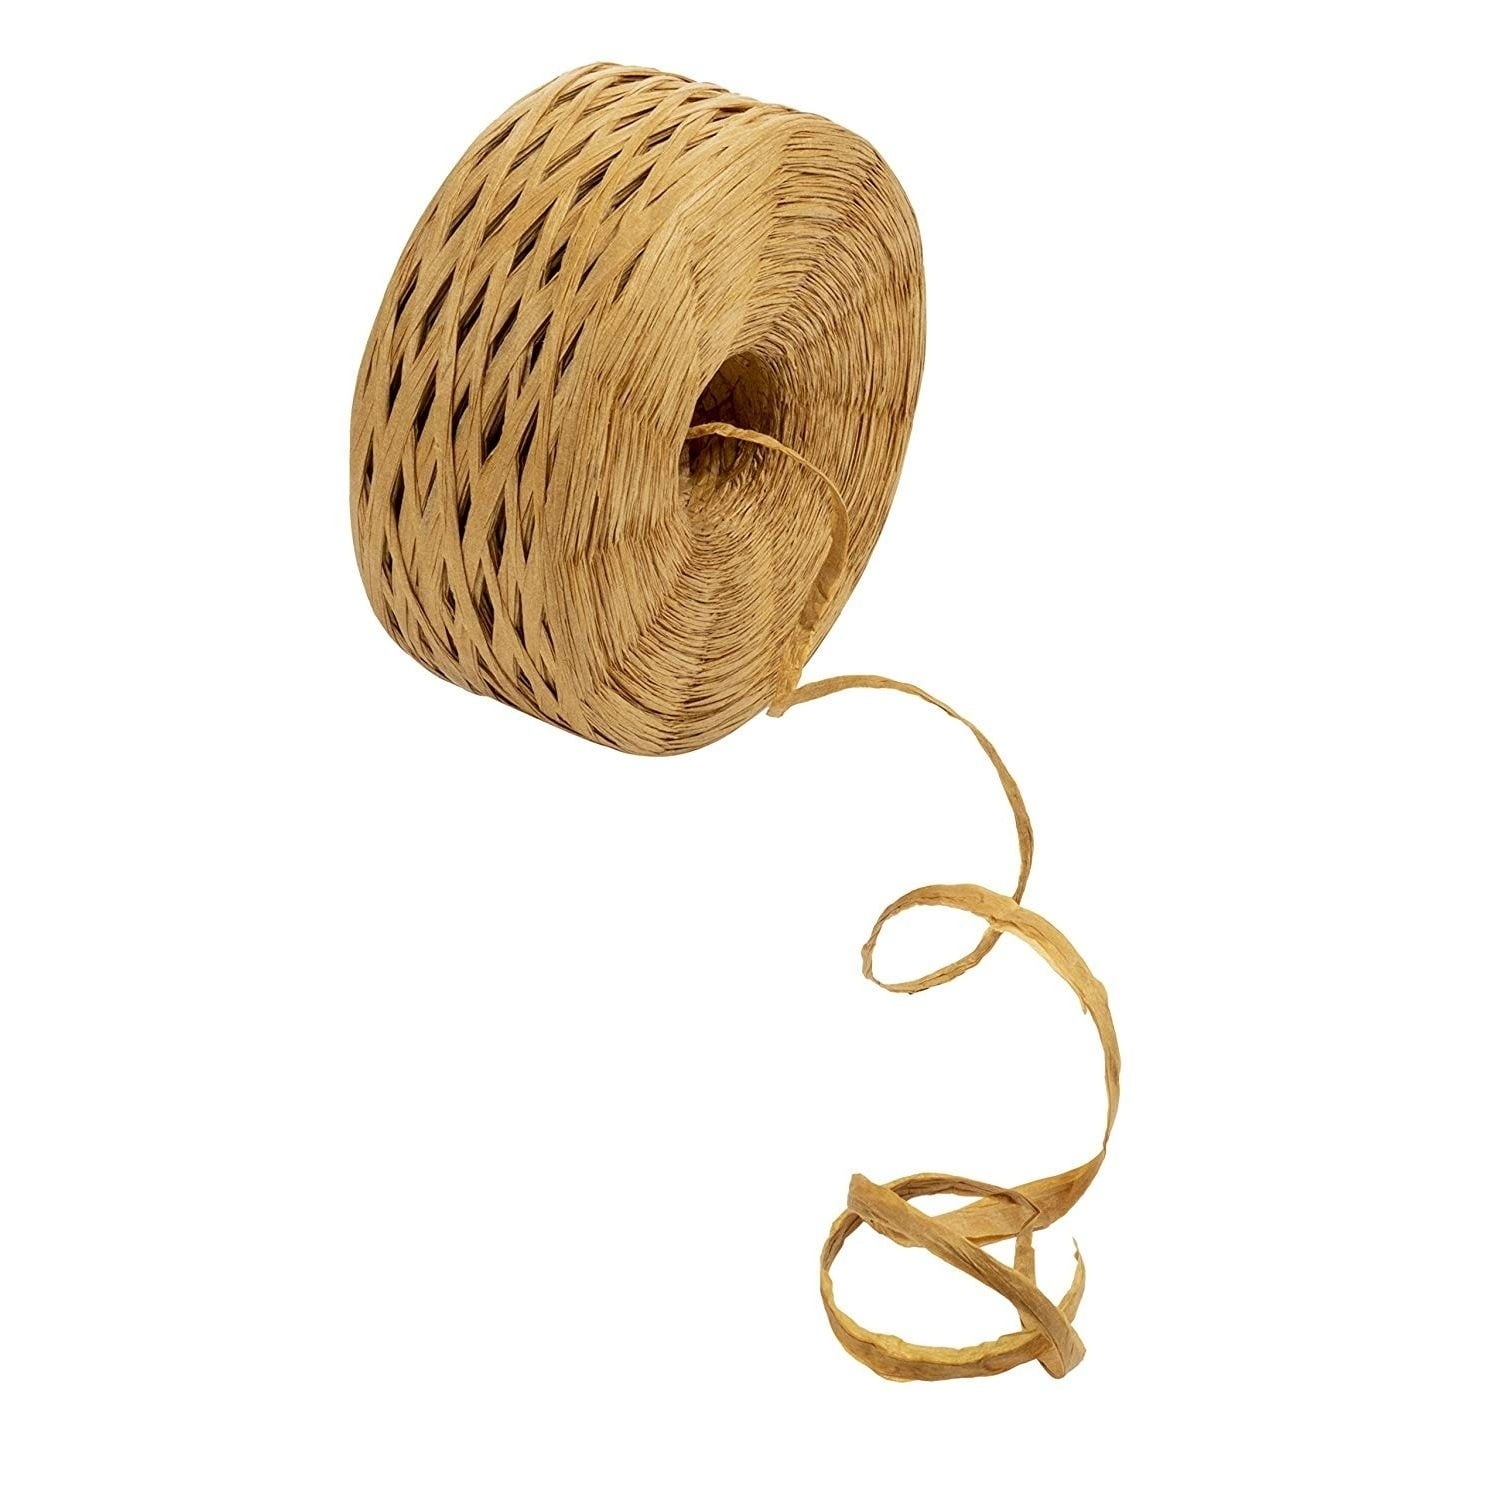 Raffia Paper Ribbon,Raffia Paper Ribbon Yarn Rope,Craft Packing Paper Twine  for Gift Wrapping, Decoration Weaving Tag Hanging,Craft Packing Paper Twine Raffia  String Christmas, 